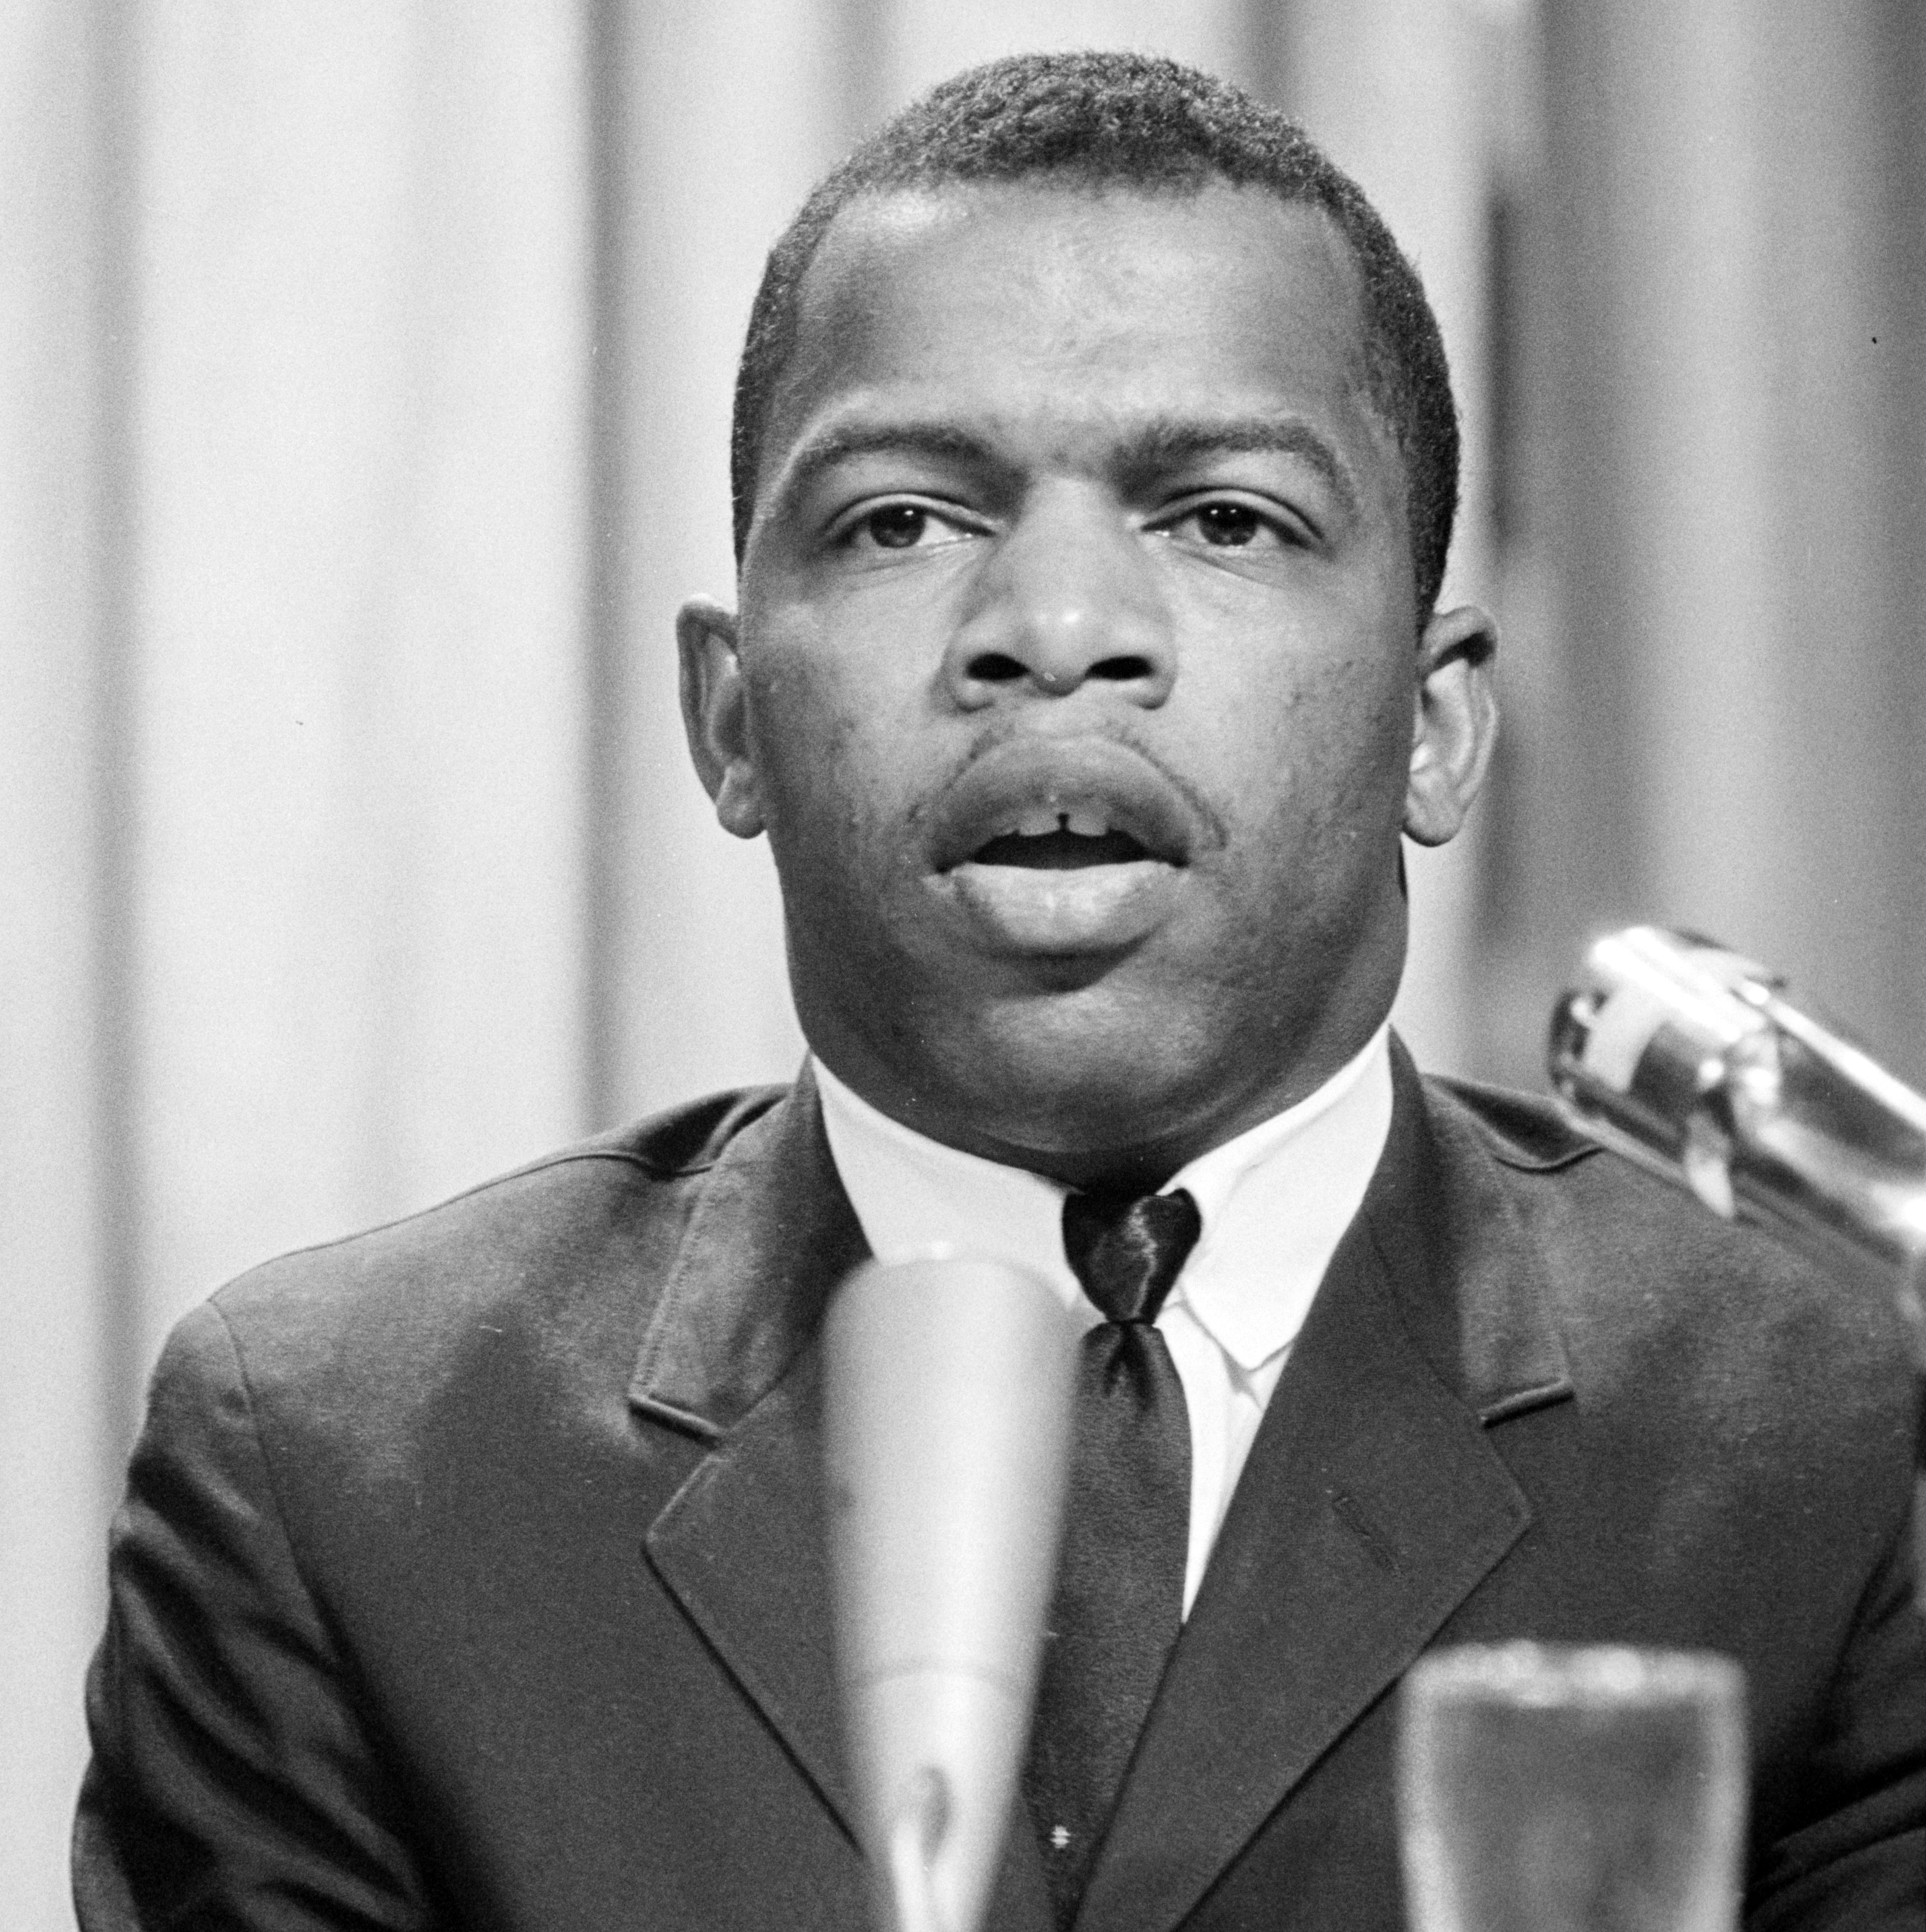 John Lewis, wearing a dark suit and tie, speaks behind a lectern in front of a rather bland gray backdrop